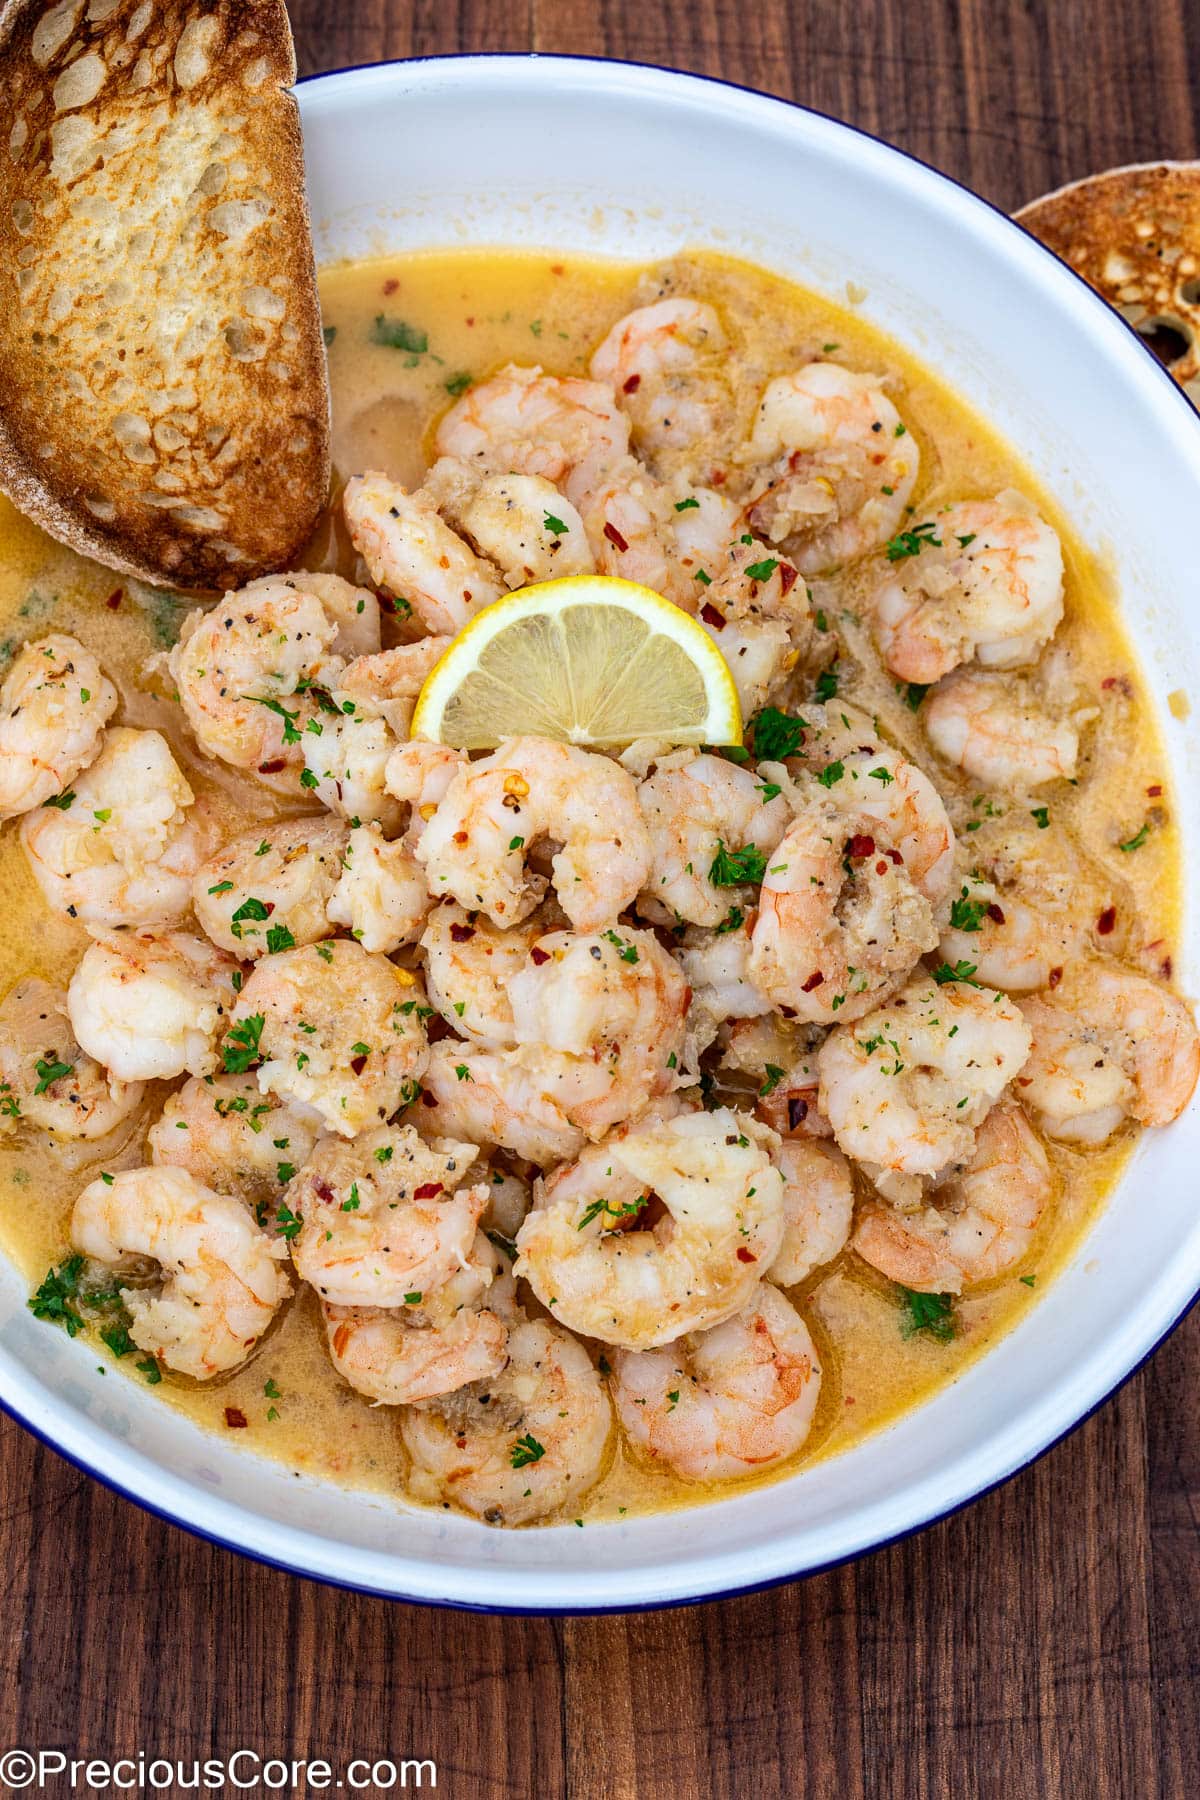 Crusty bread in a bowl of shrimp in white wine sauce.